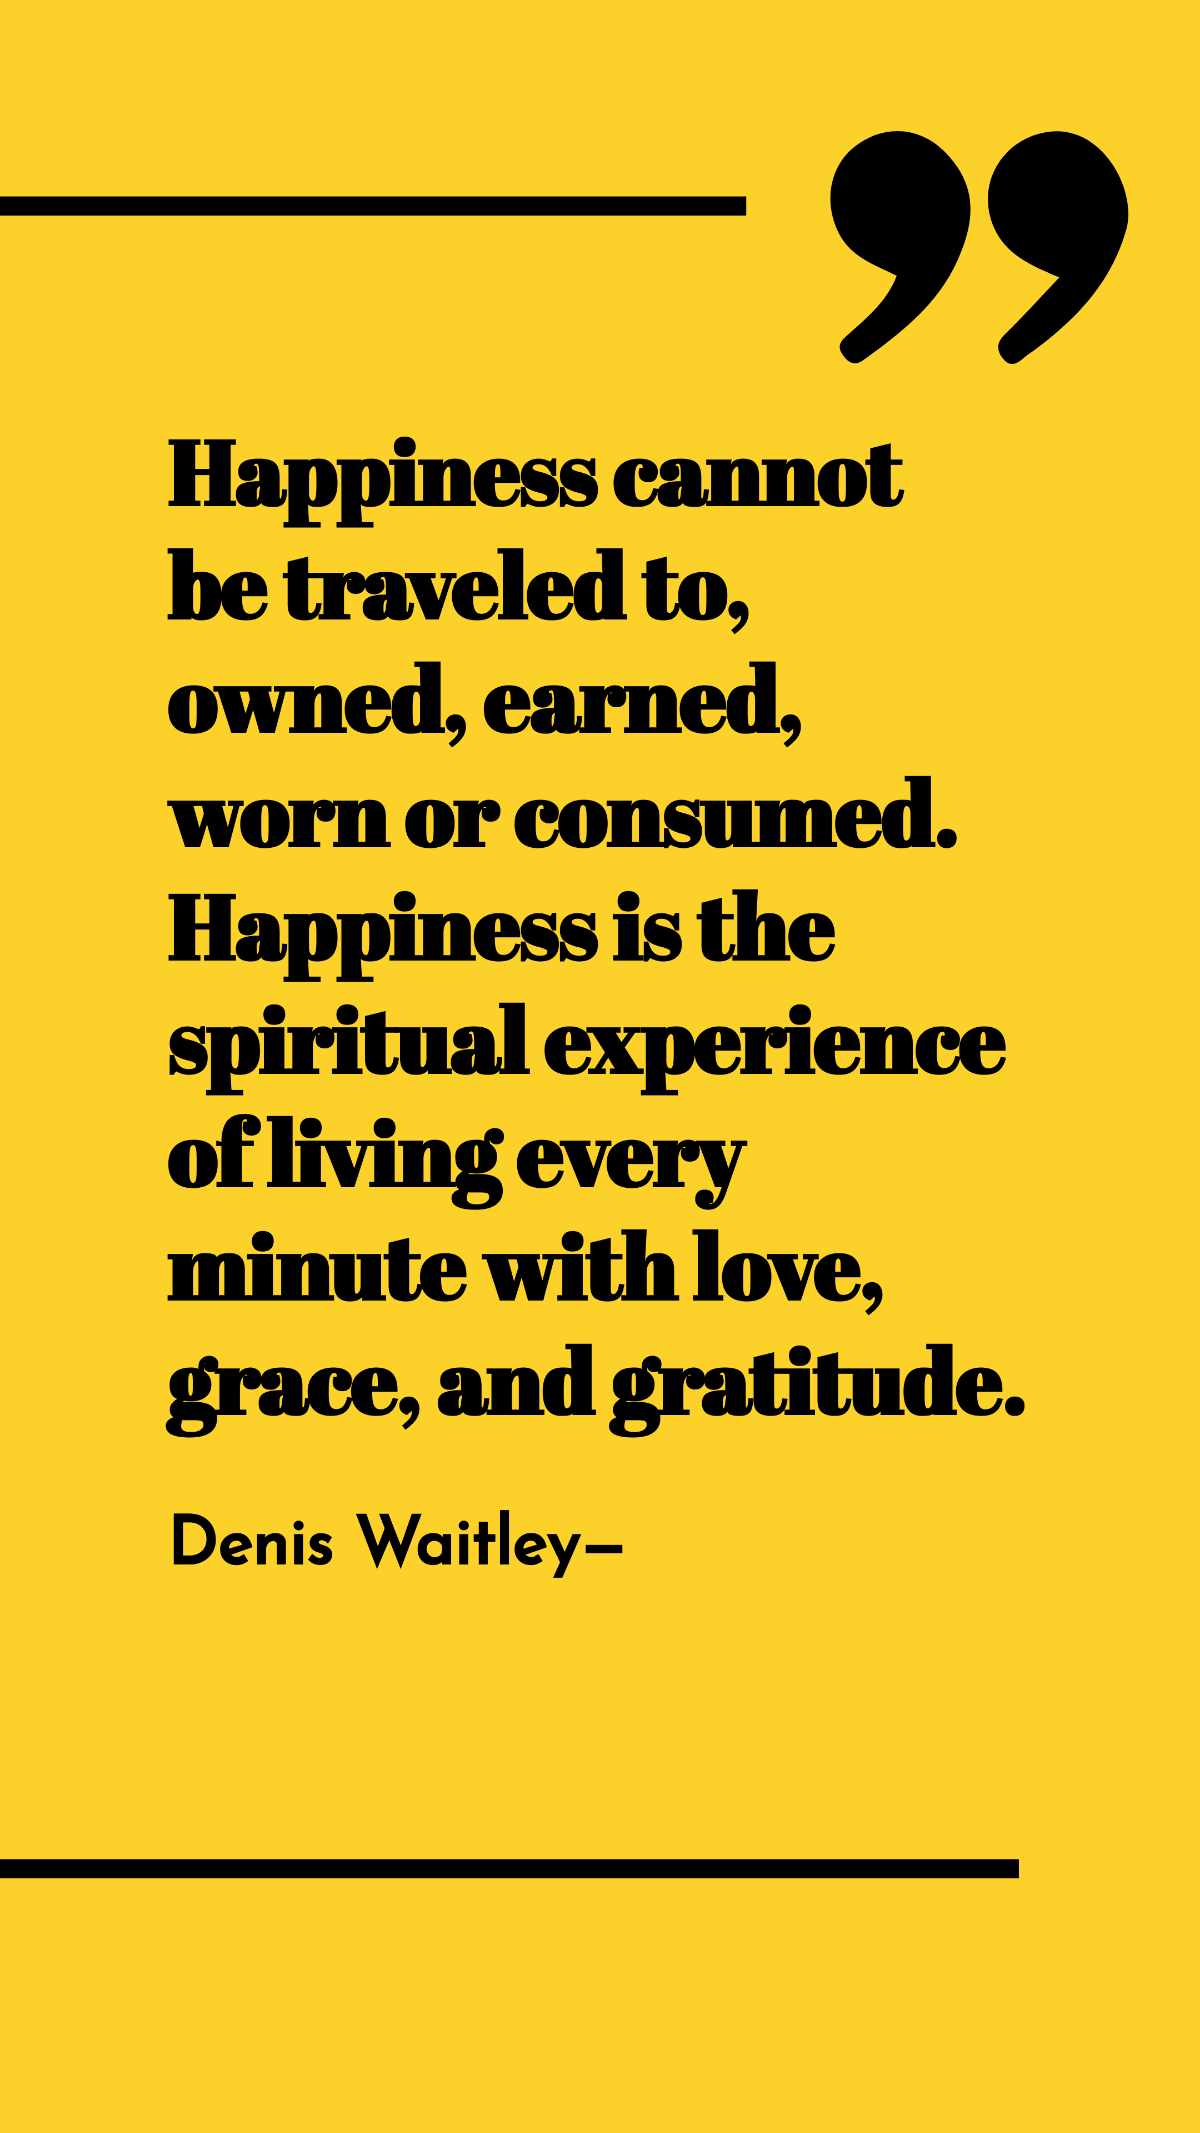 Denis Waitley - Happiness cannot be traveled to, owned, earned, worn or consumed. Happiness is the spiritual experience of living every minute with love, grace, and gratitude. Template